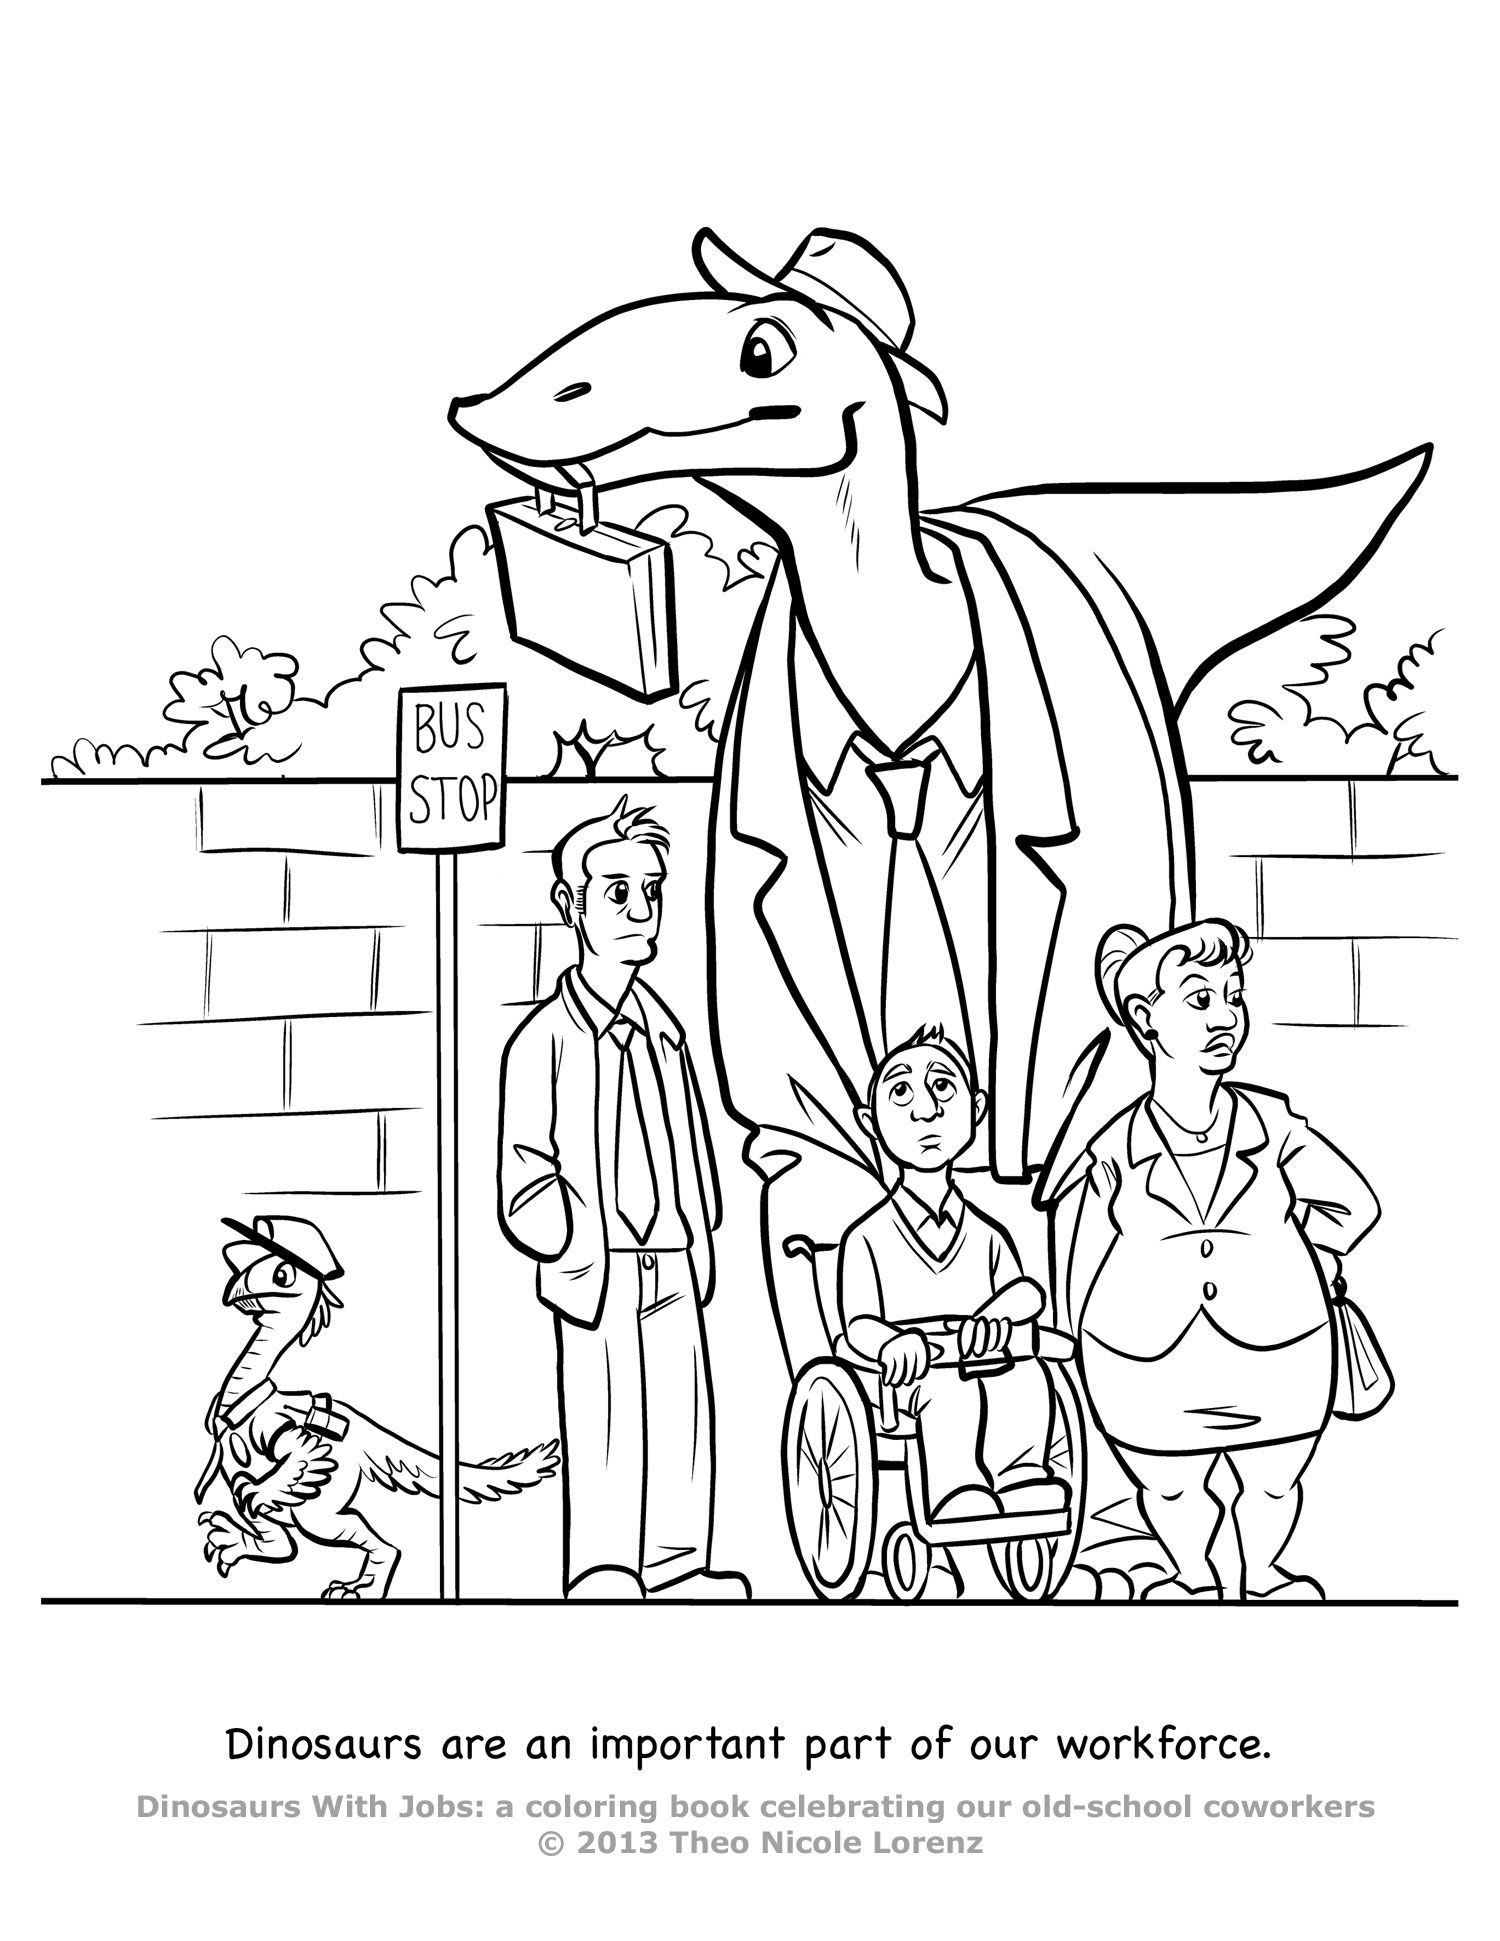 Dinosaurs With Jobs coloring book